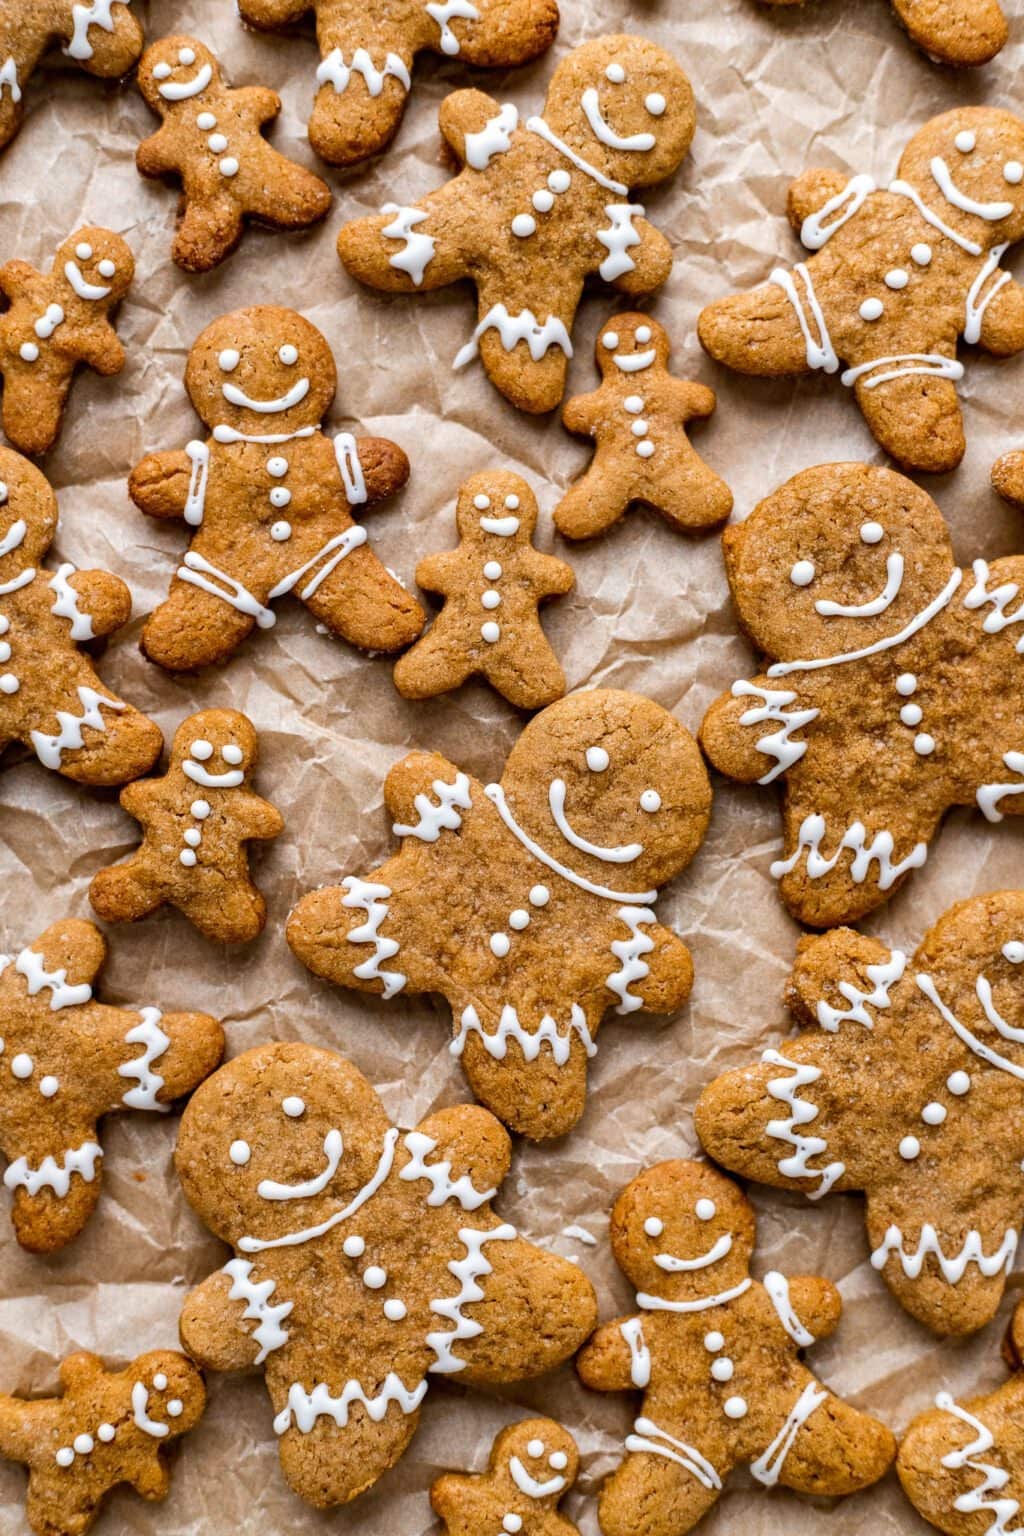 Bunch of gingerbread cookies on parchment paper.